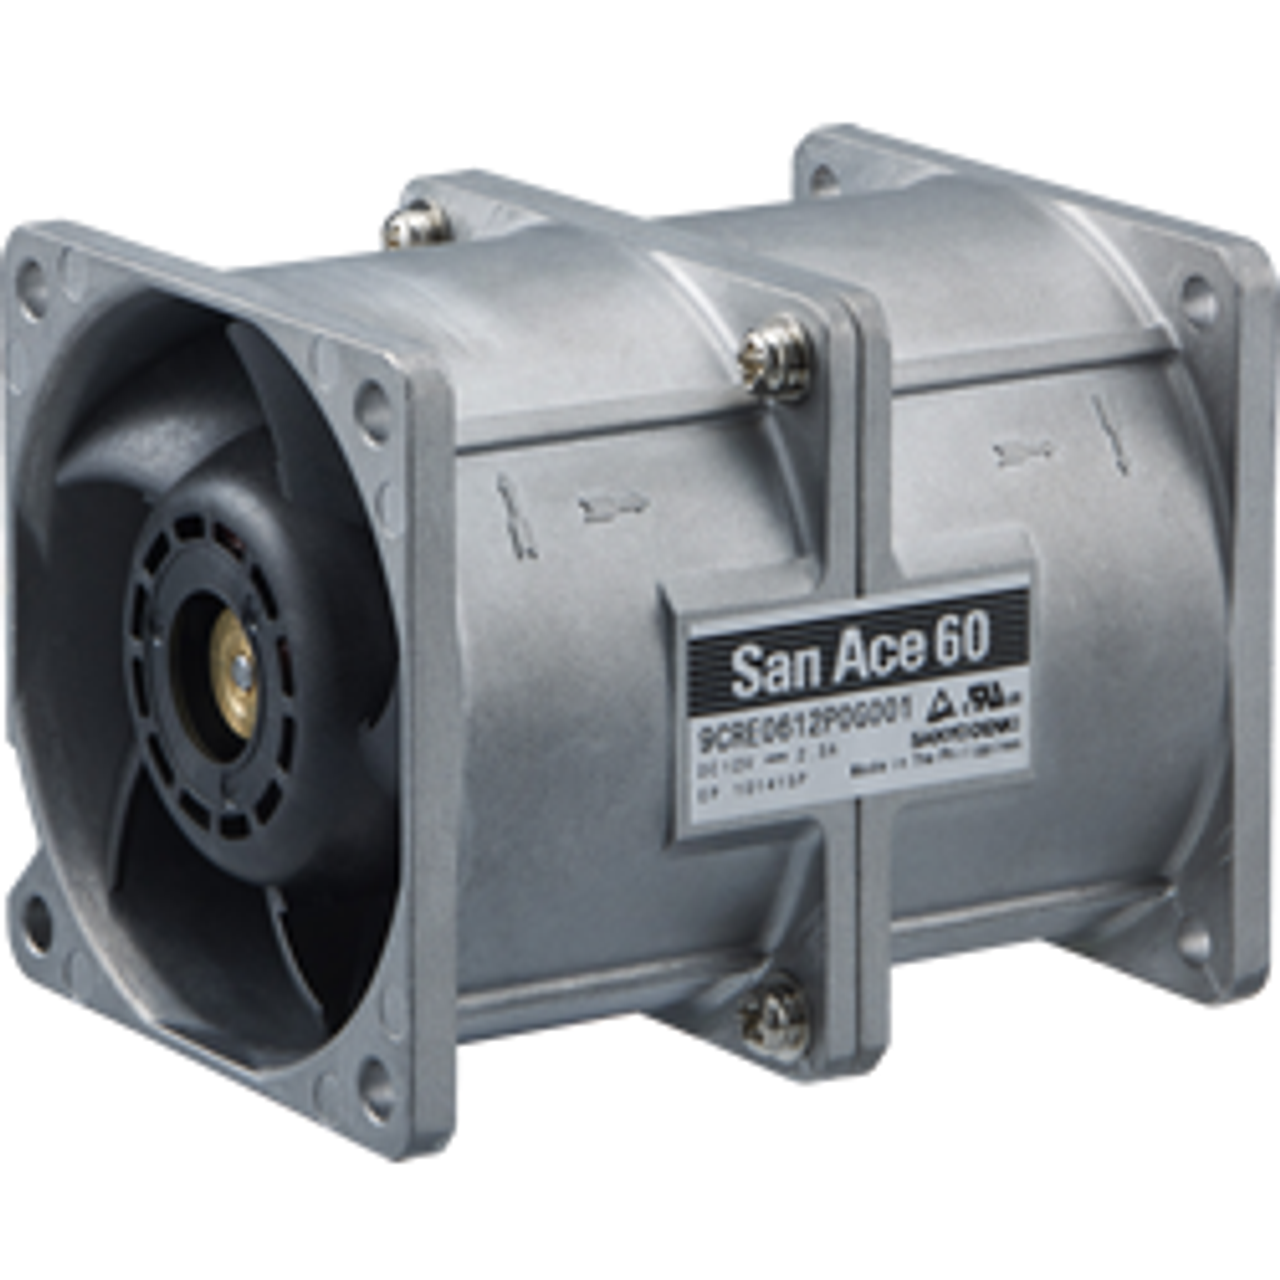 Counter Rotating Fan  San Ace 60 Product image